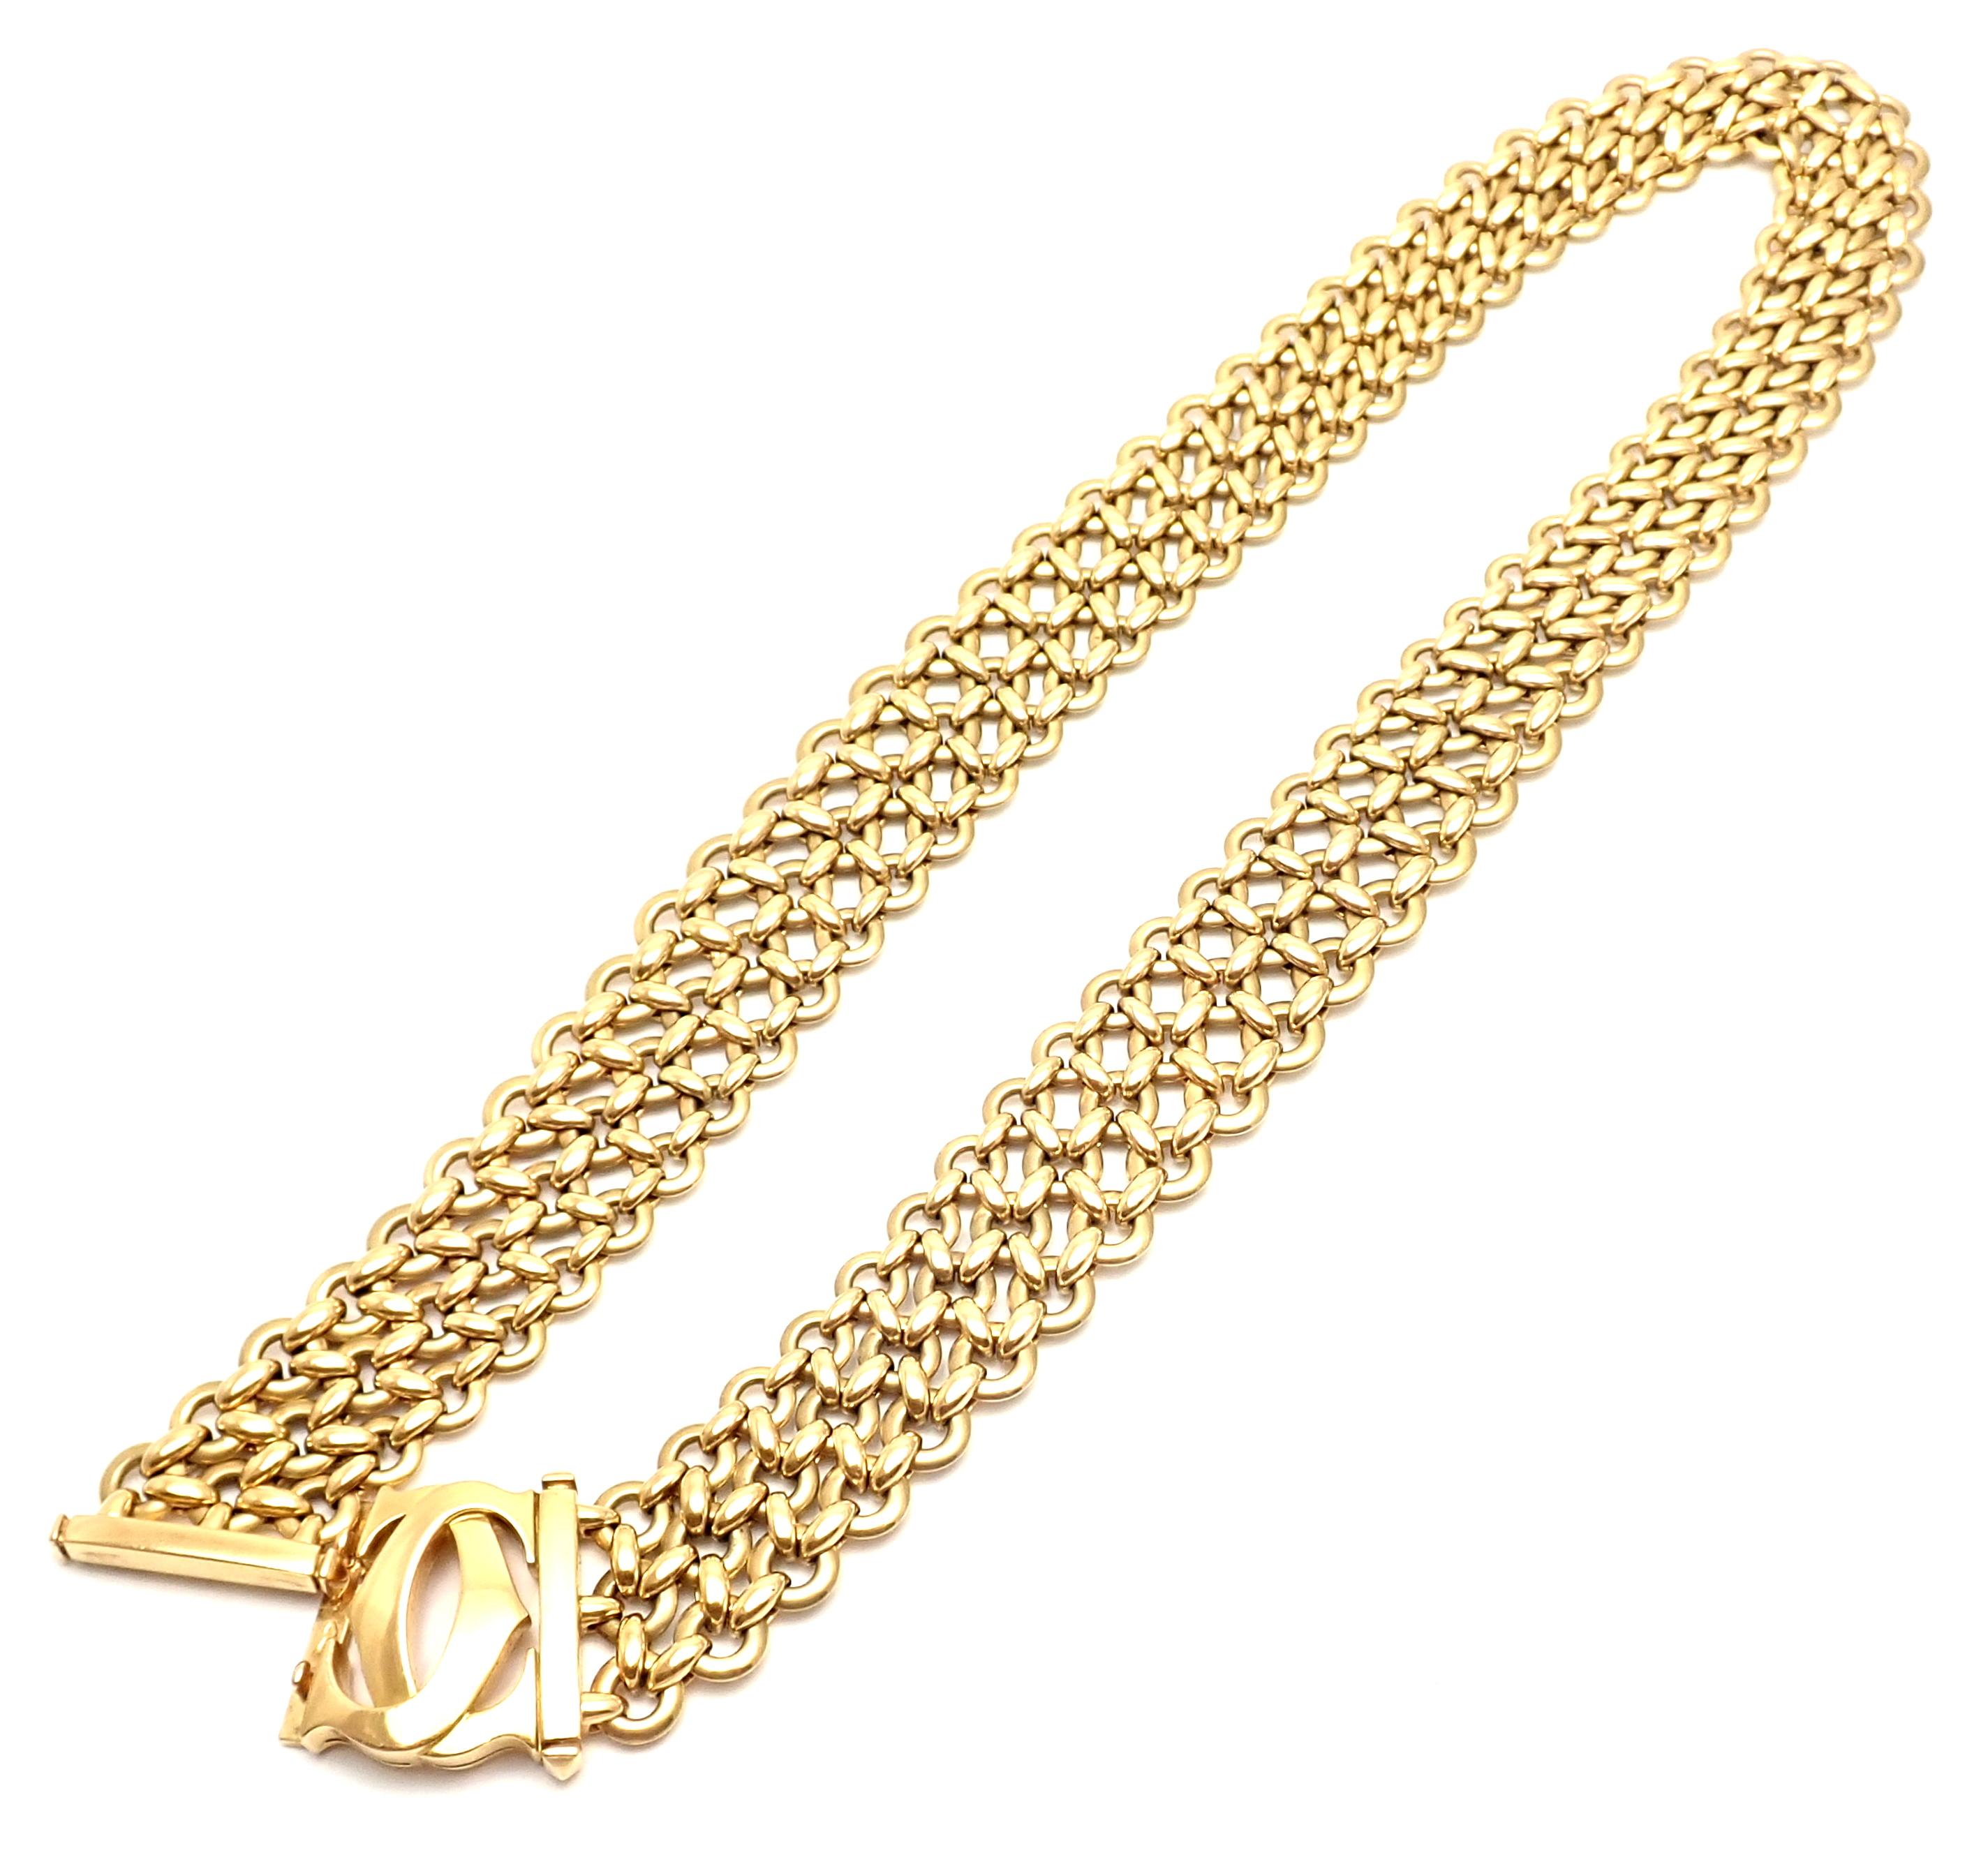 Women's or Men's Cartier Penelope Double C Three-Row Yellow Gold Link Necklace